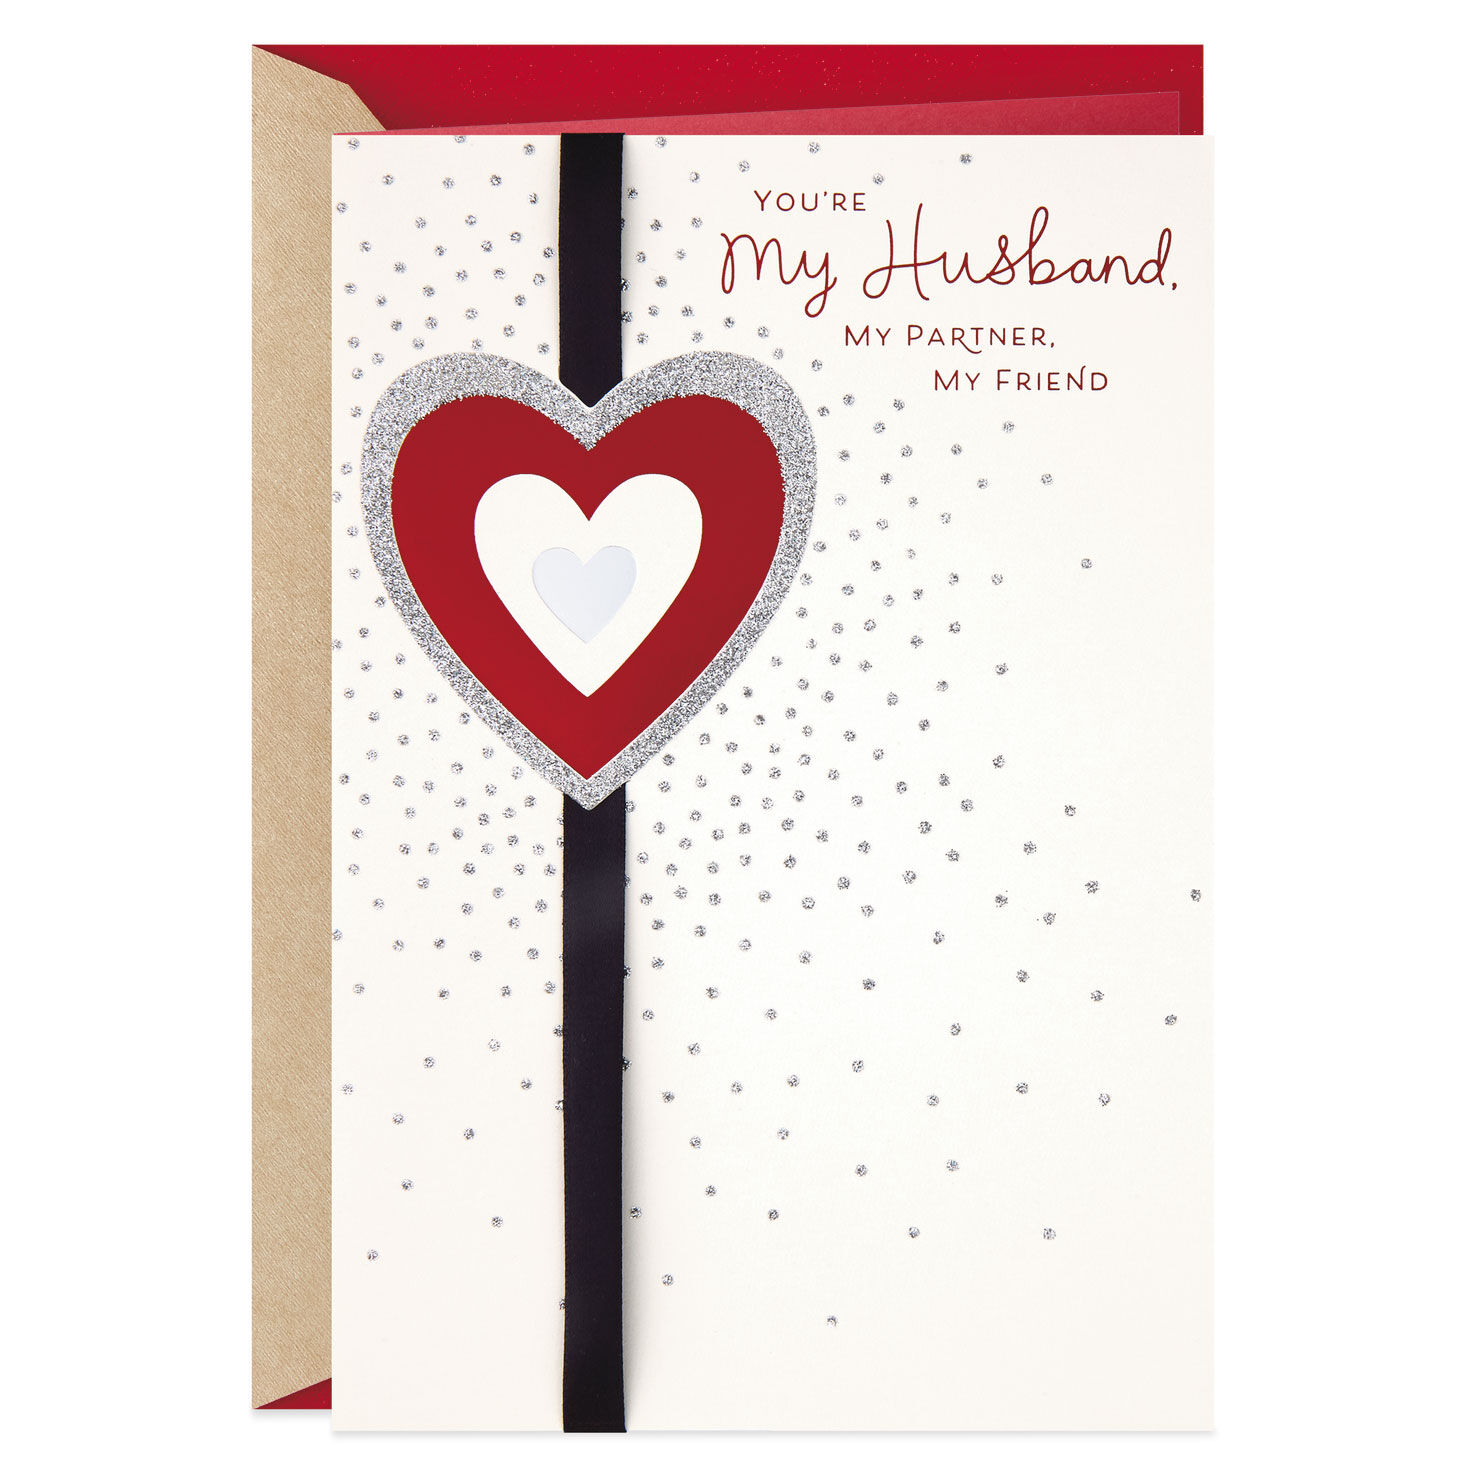 New Husband Details about   Hallmark Valentine's Day Card with envelope 